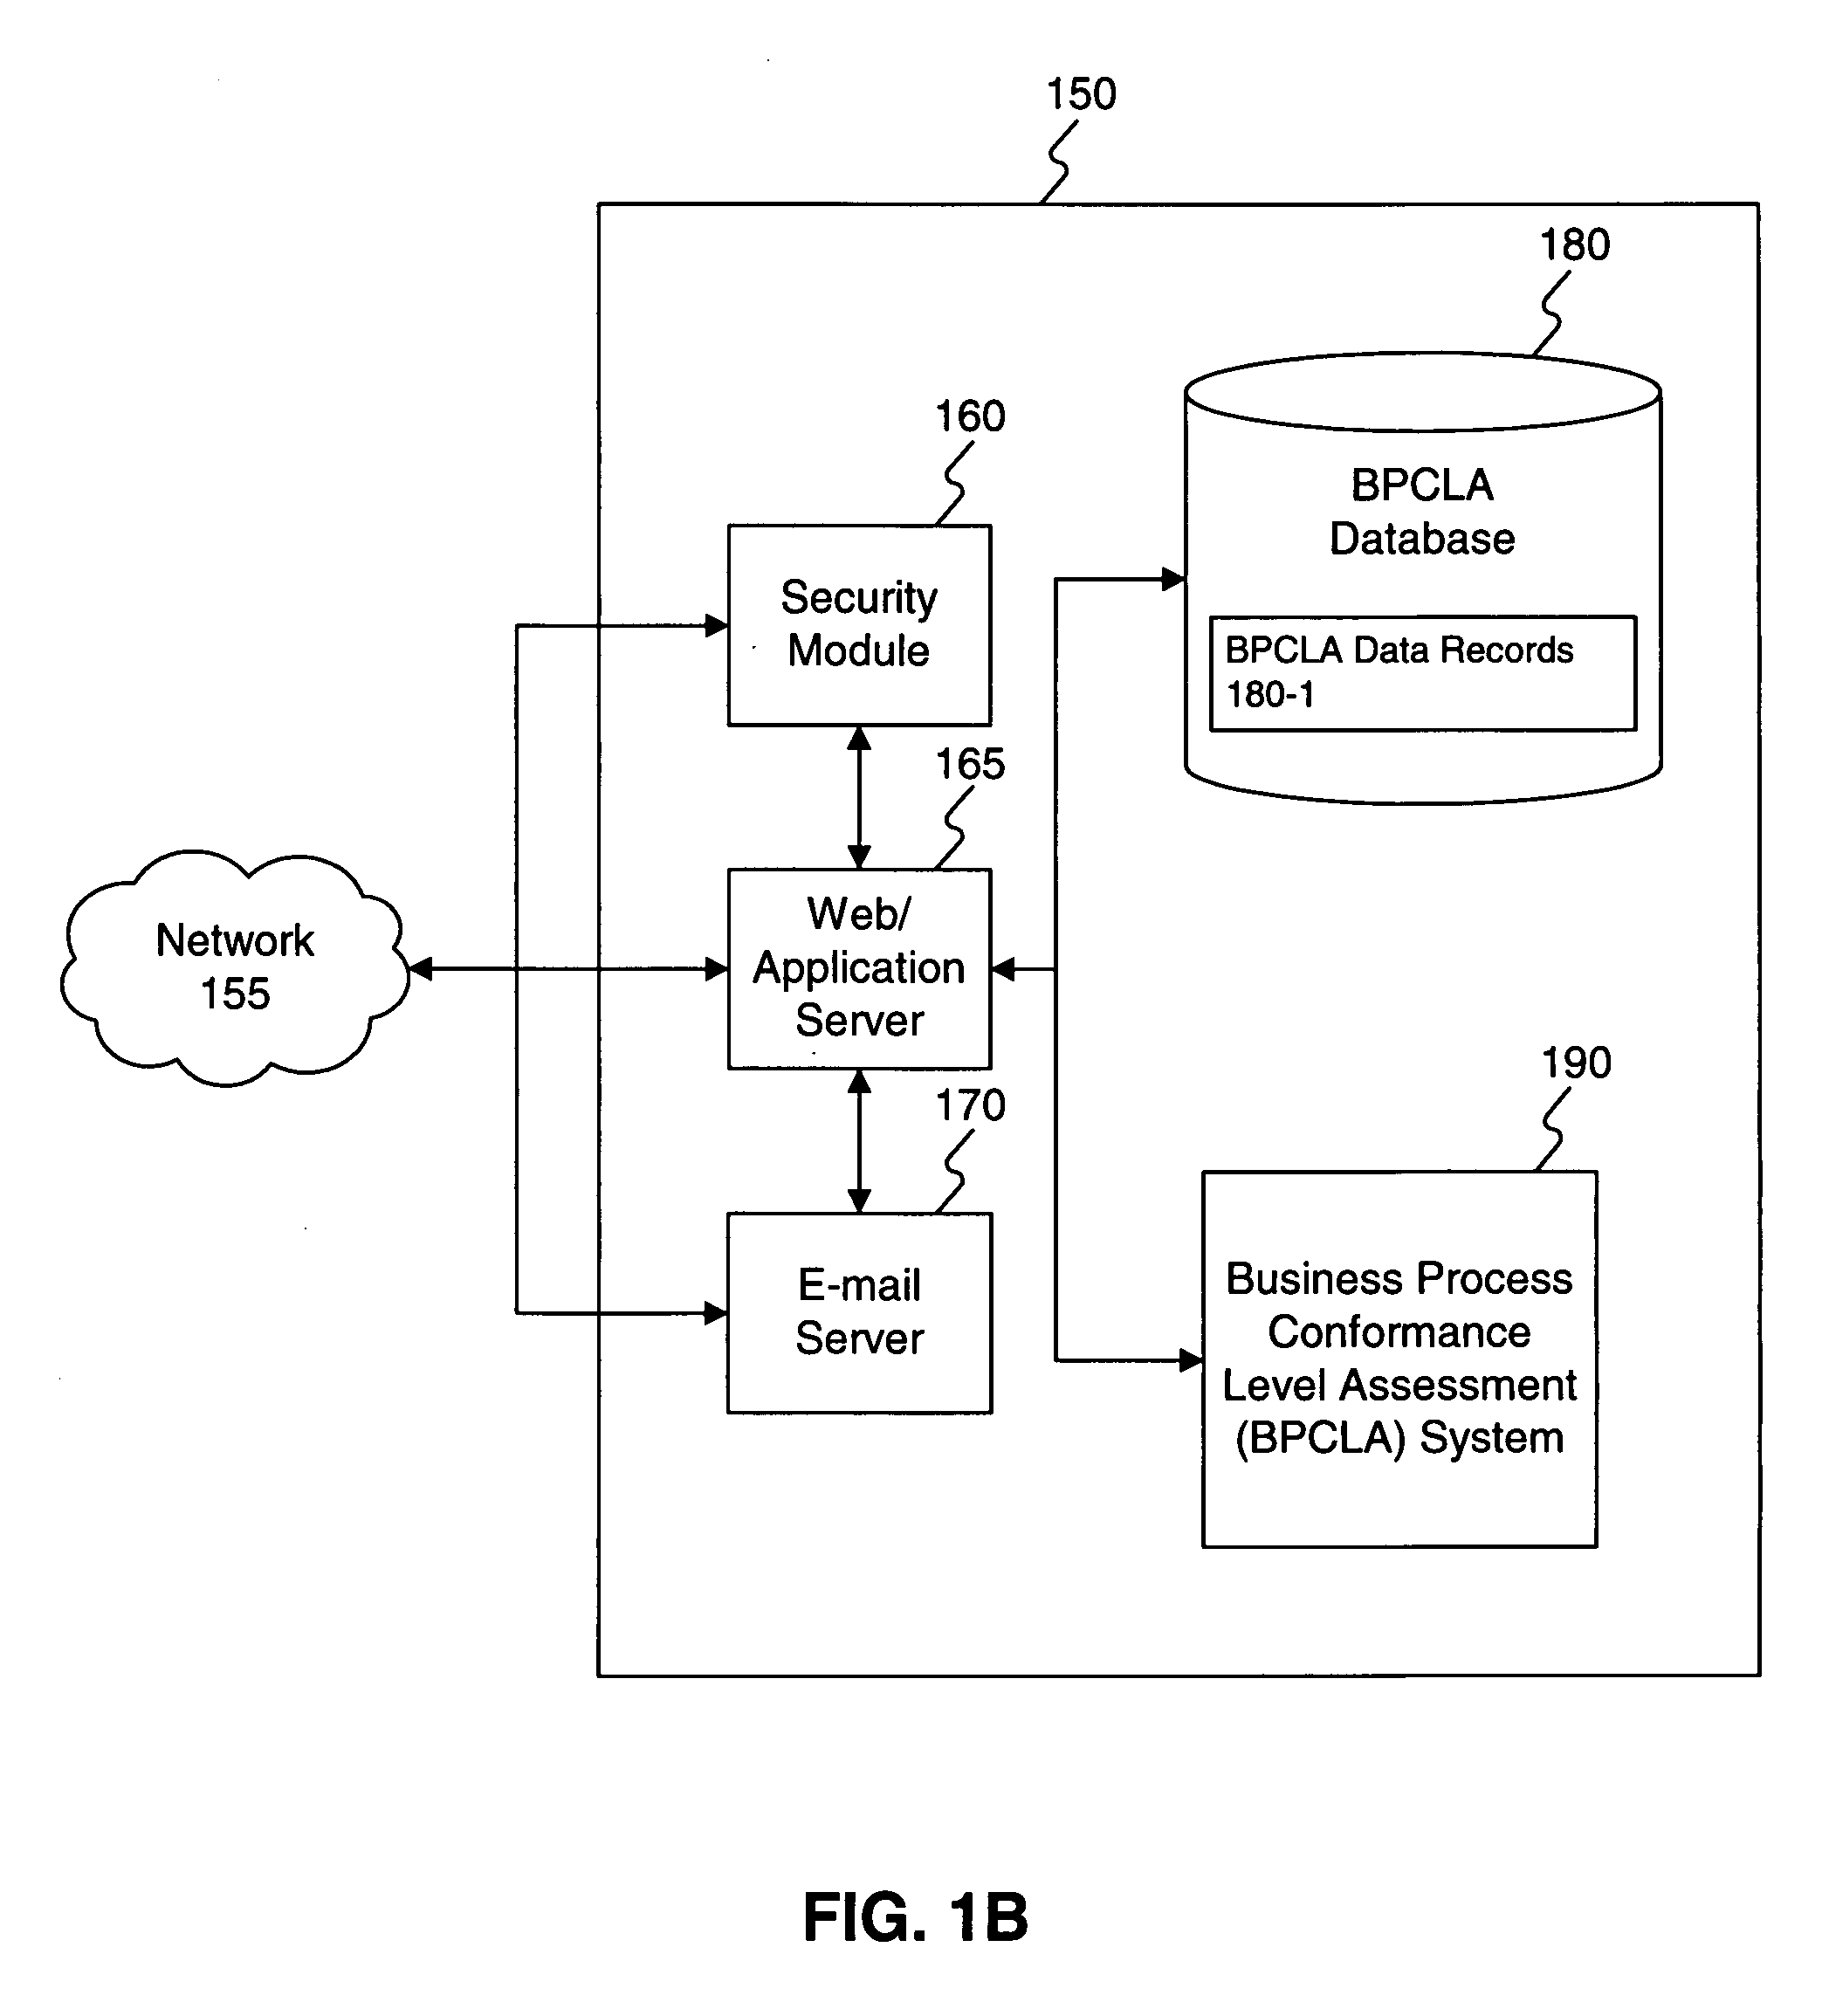 Systems and methods for assessing the level of conformance of a business process